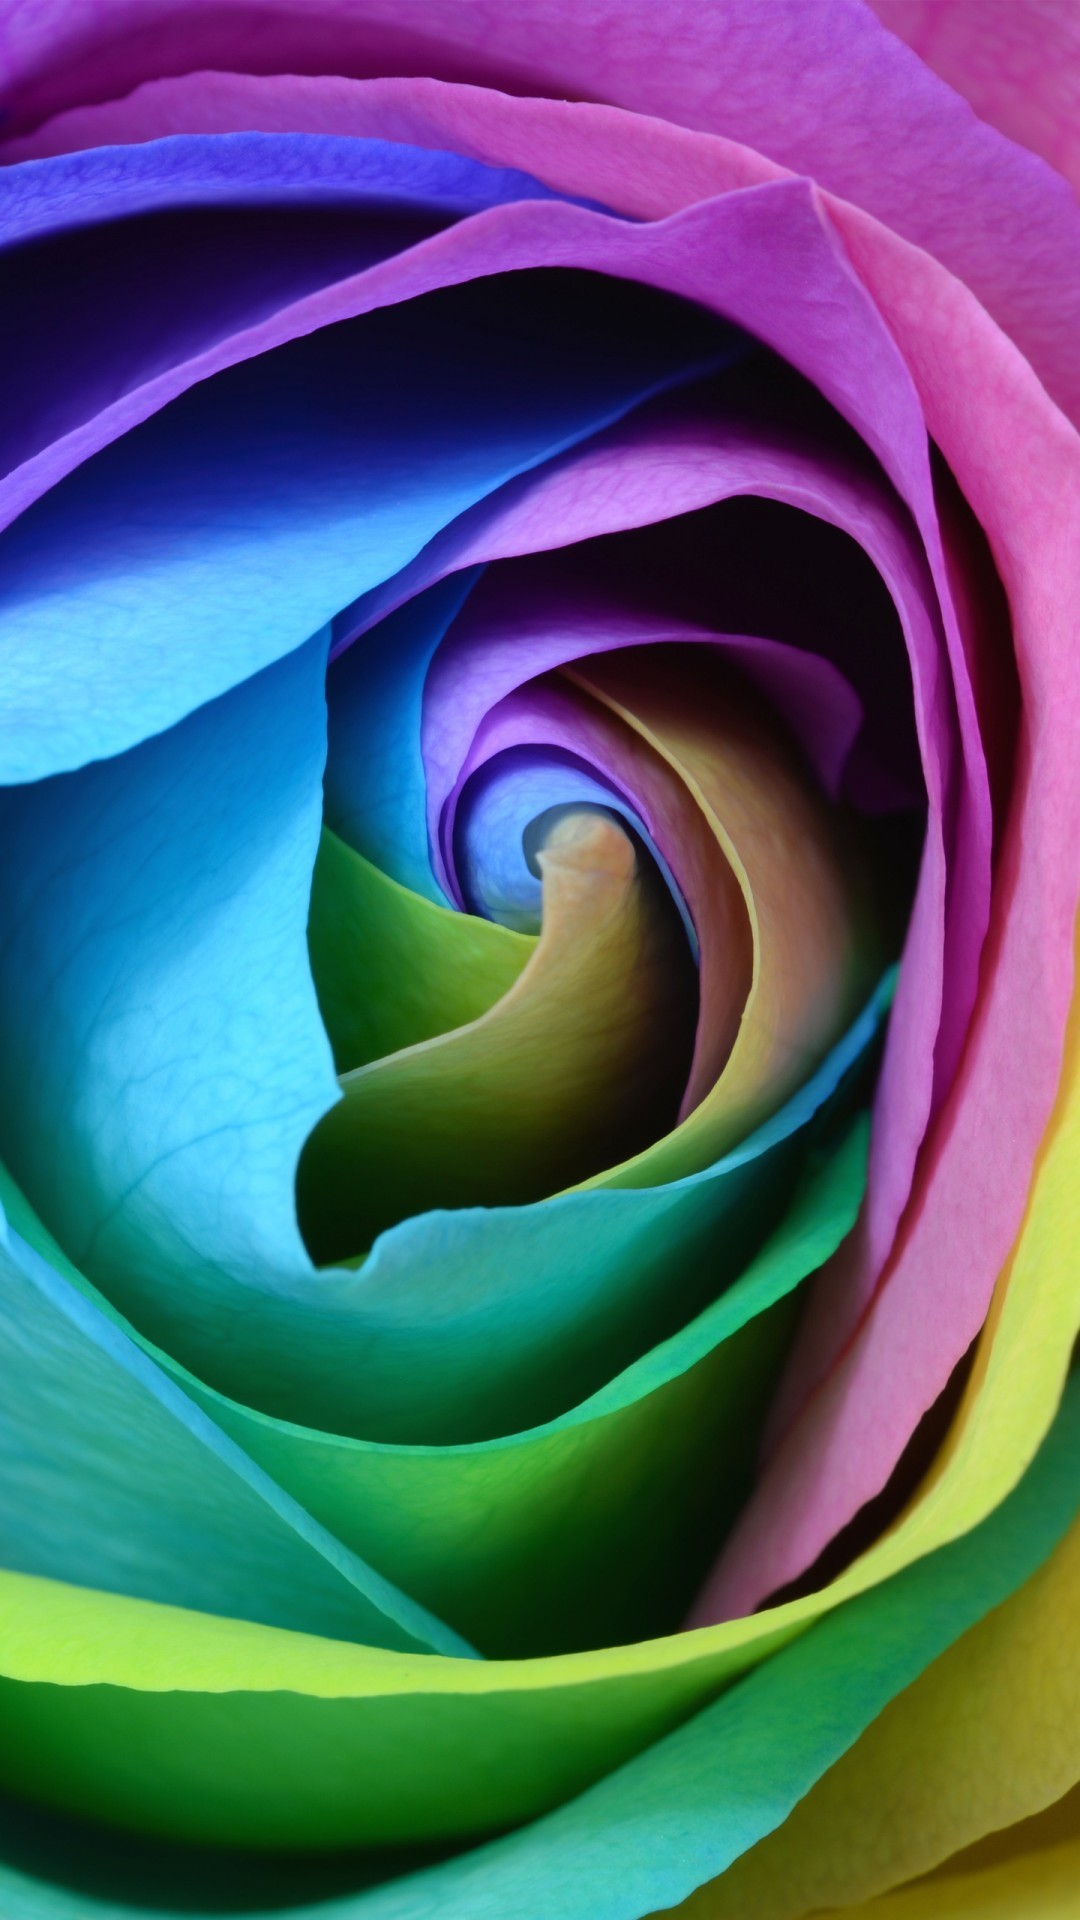 Real Rainbows In The Sky - Colored Rose Wallpaper 4k , HD Wallpaper & Backgrounds